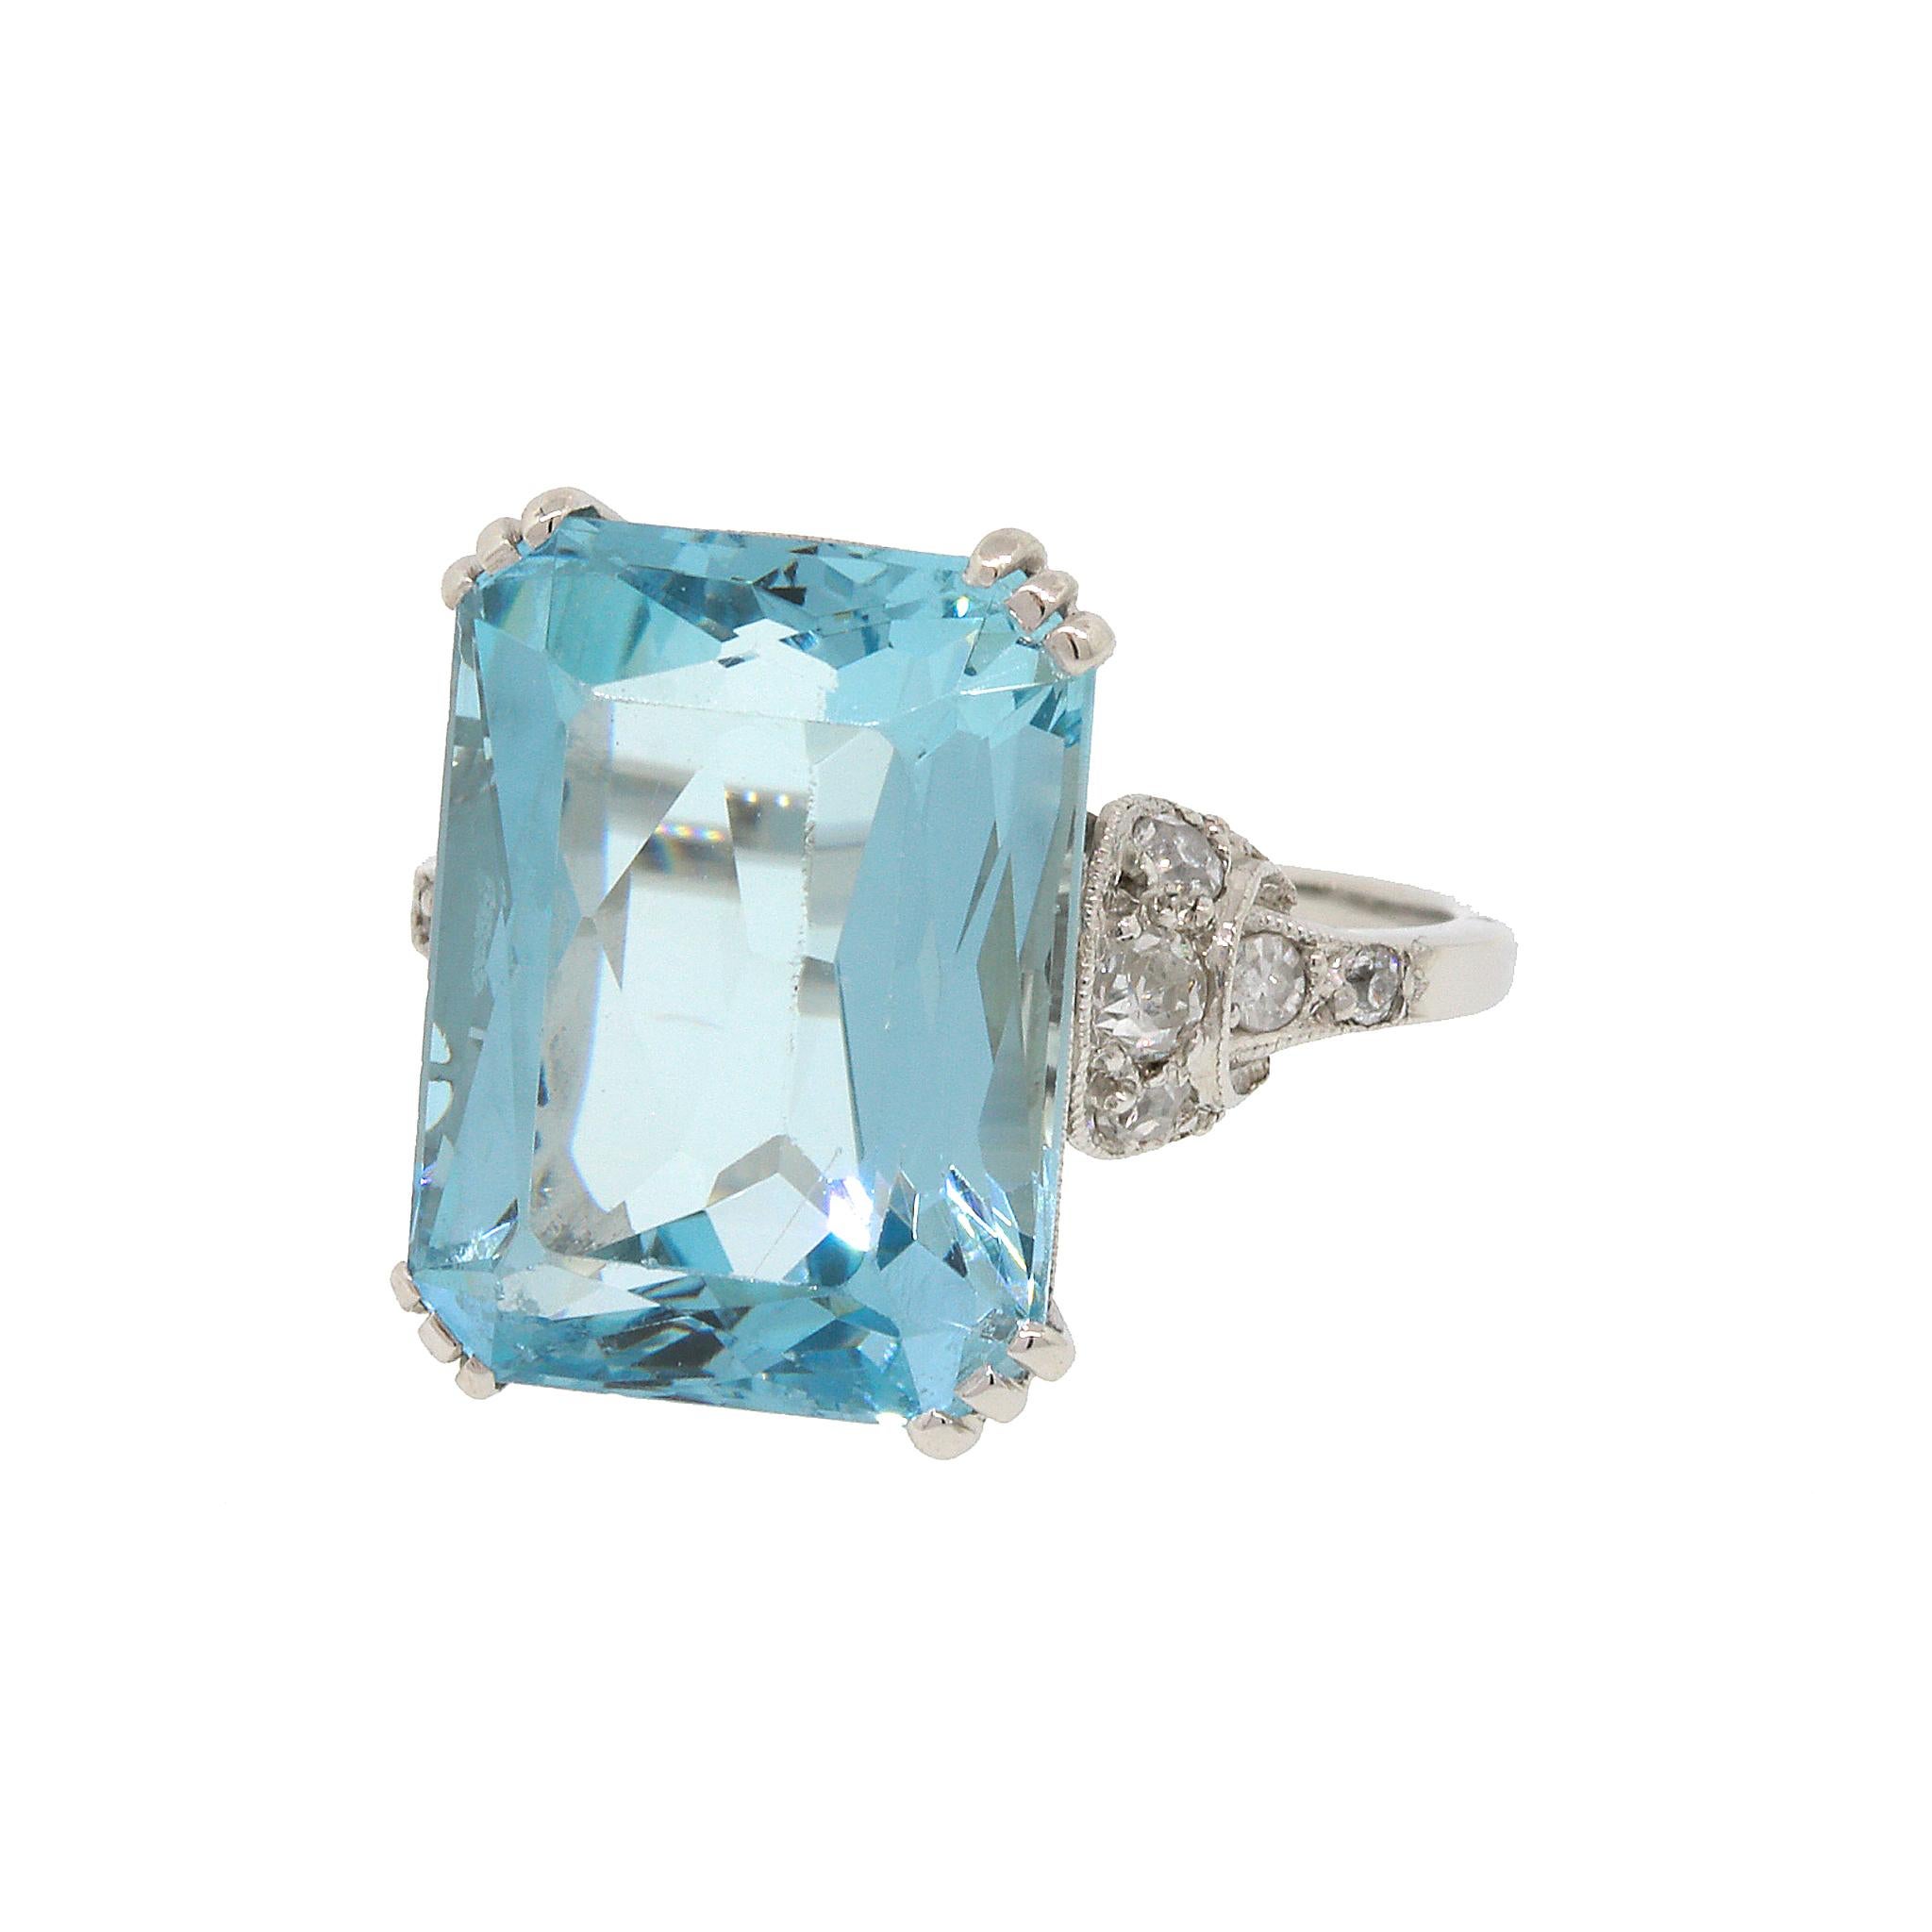 This stunning 8.05-carat aquamarine ring makes it a beautiful gift fit for that very special someone.
Platinum
Aquamarine: 8.05 tcw
Diamond: 0.30 ct twd
Total Weight: 5.2 grams
Ring Size: 5.75